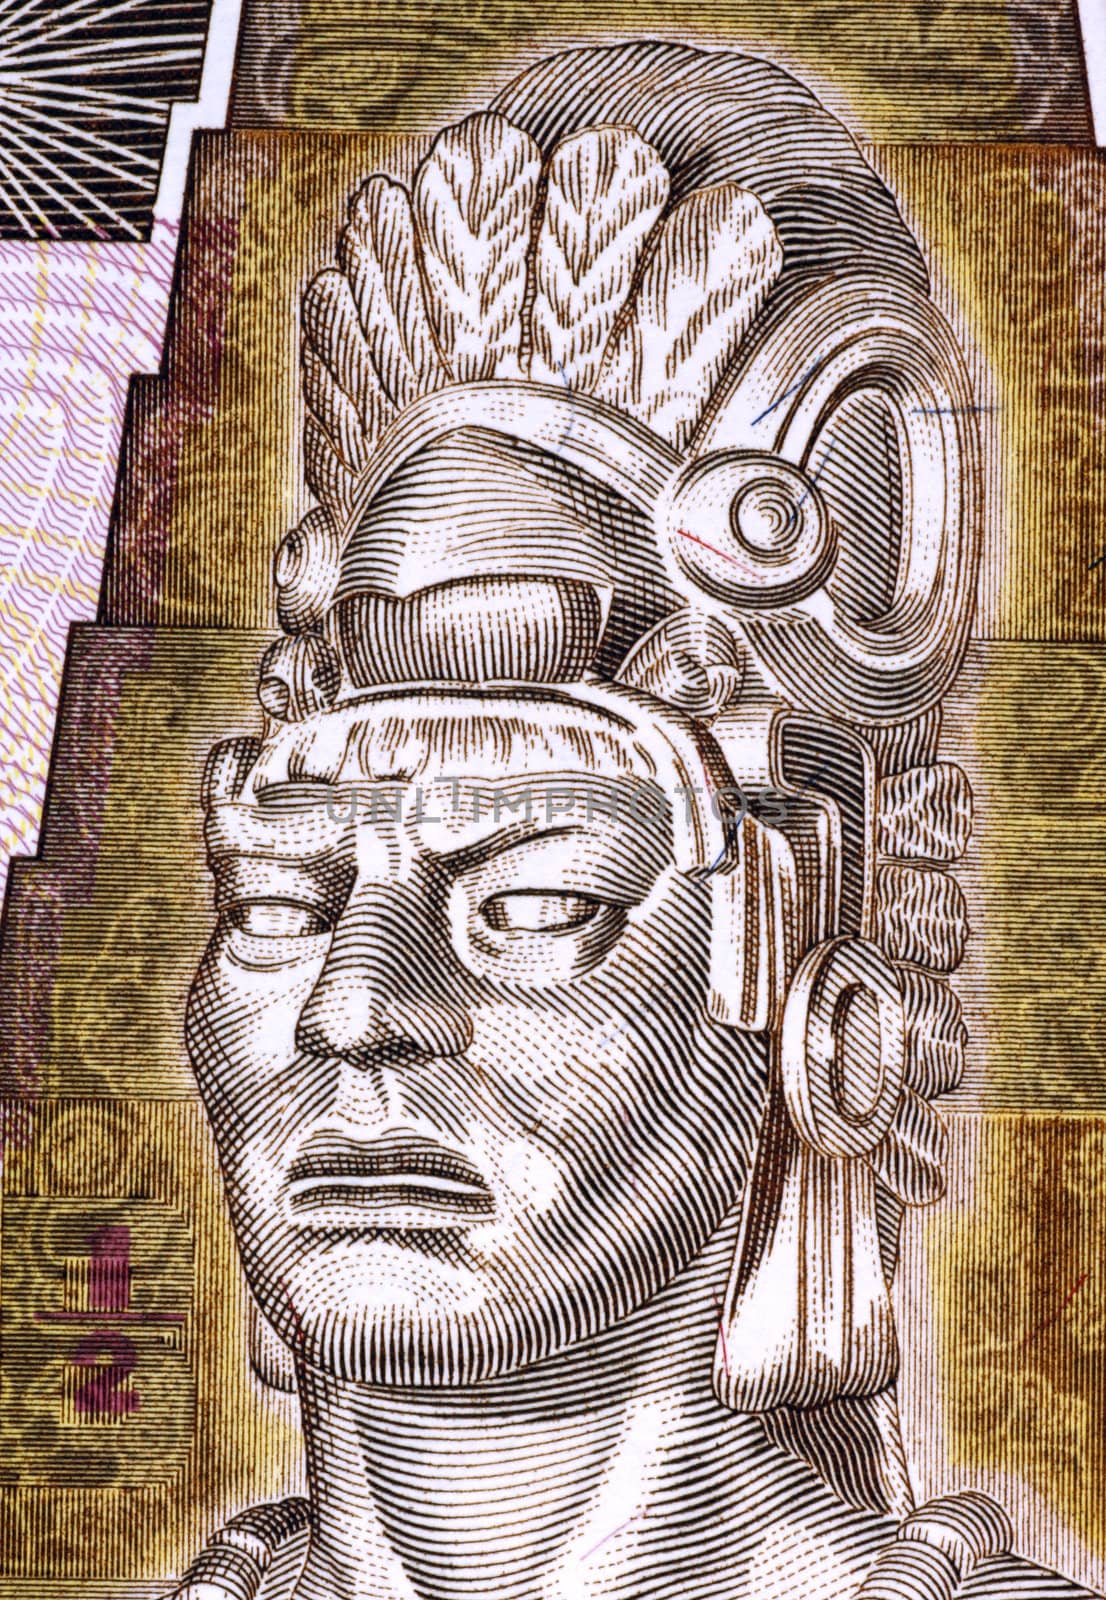 Tecun Uman (1500-1524) on Half Quetzal 1998 Banknote from Guatemala. Last ruler and king of the K'iche' Maya people.